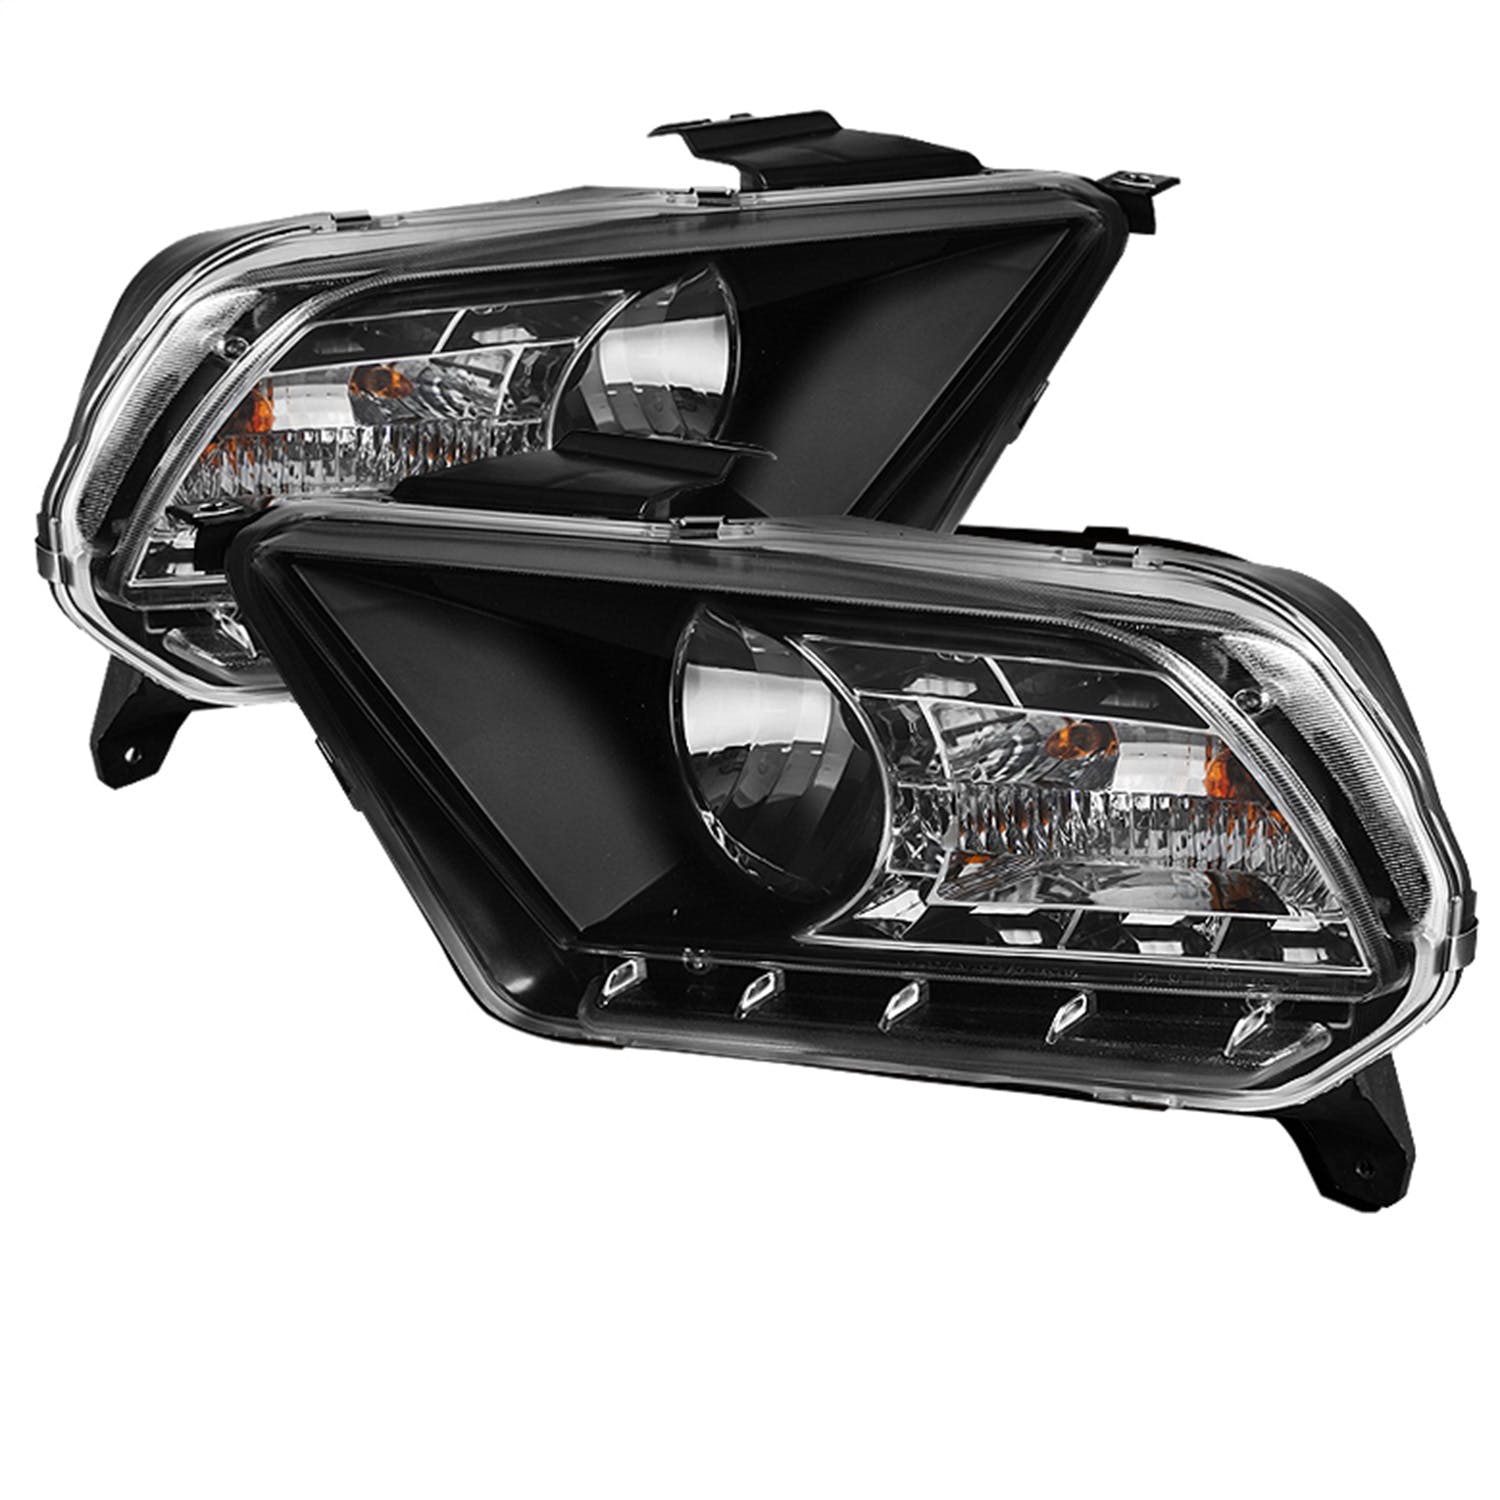 Spyder Auto 5042149 (Spyder) Ford Mustang 10-13 ( Non HID ) DRL LED Crystal Headlights-Black